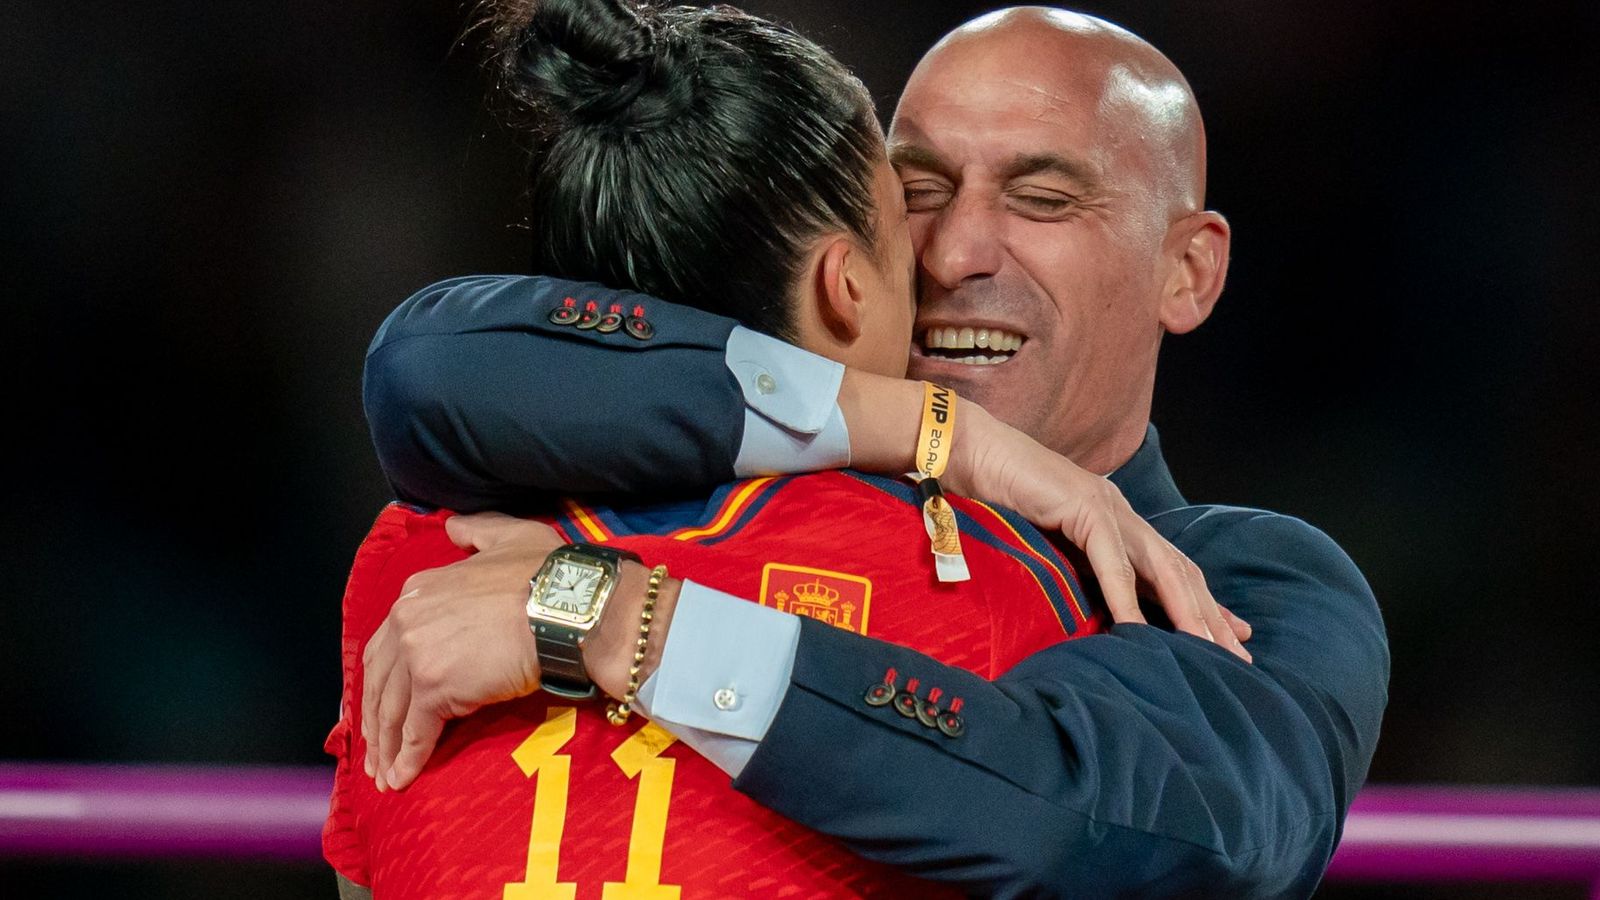 Women's World Cup: Spain's FA chief Luis Rubiales says sorry after kissing Jennifer Hermoso on the lips following victory